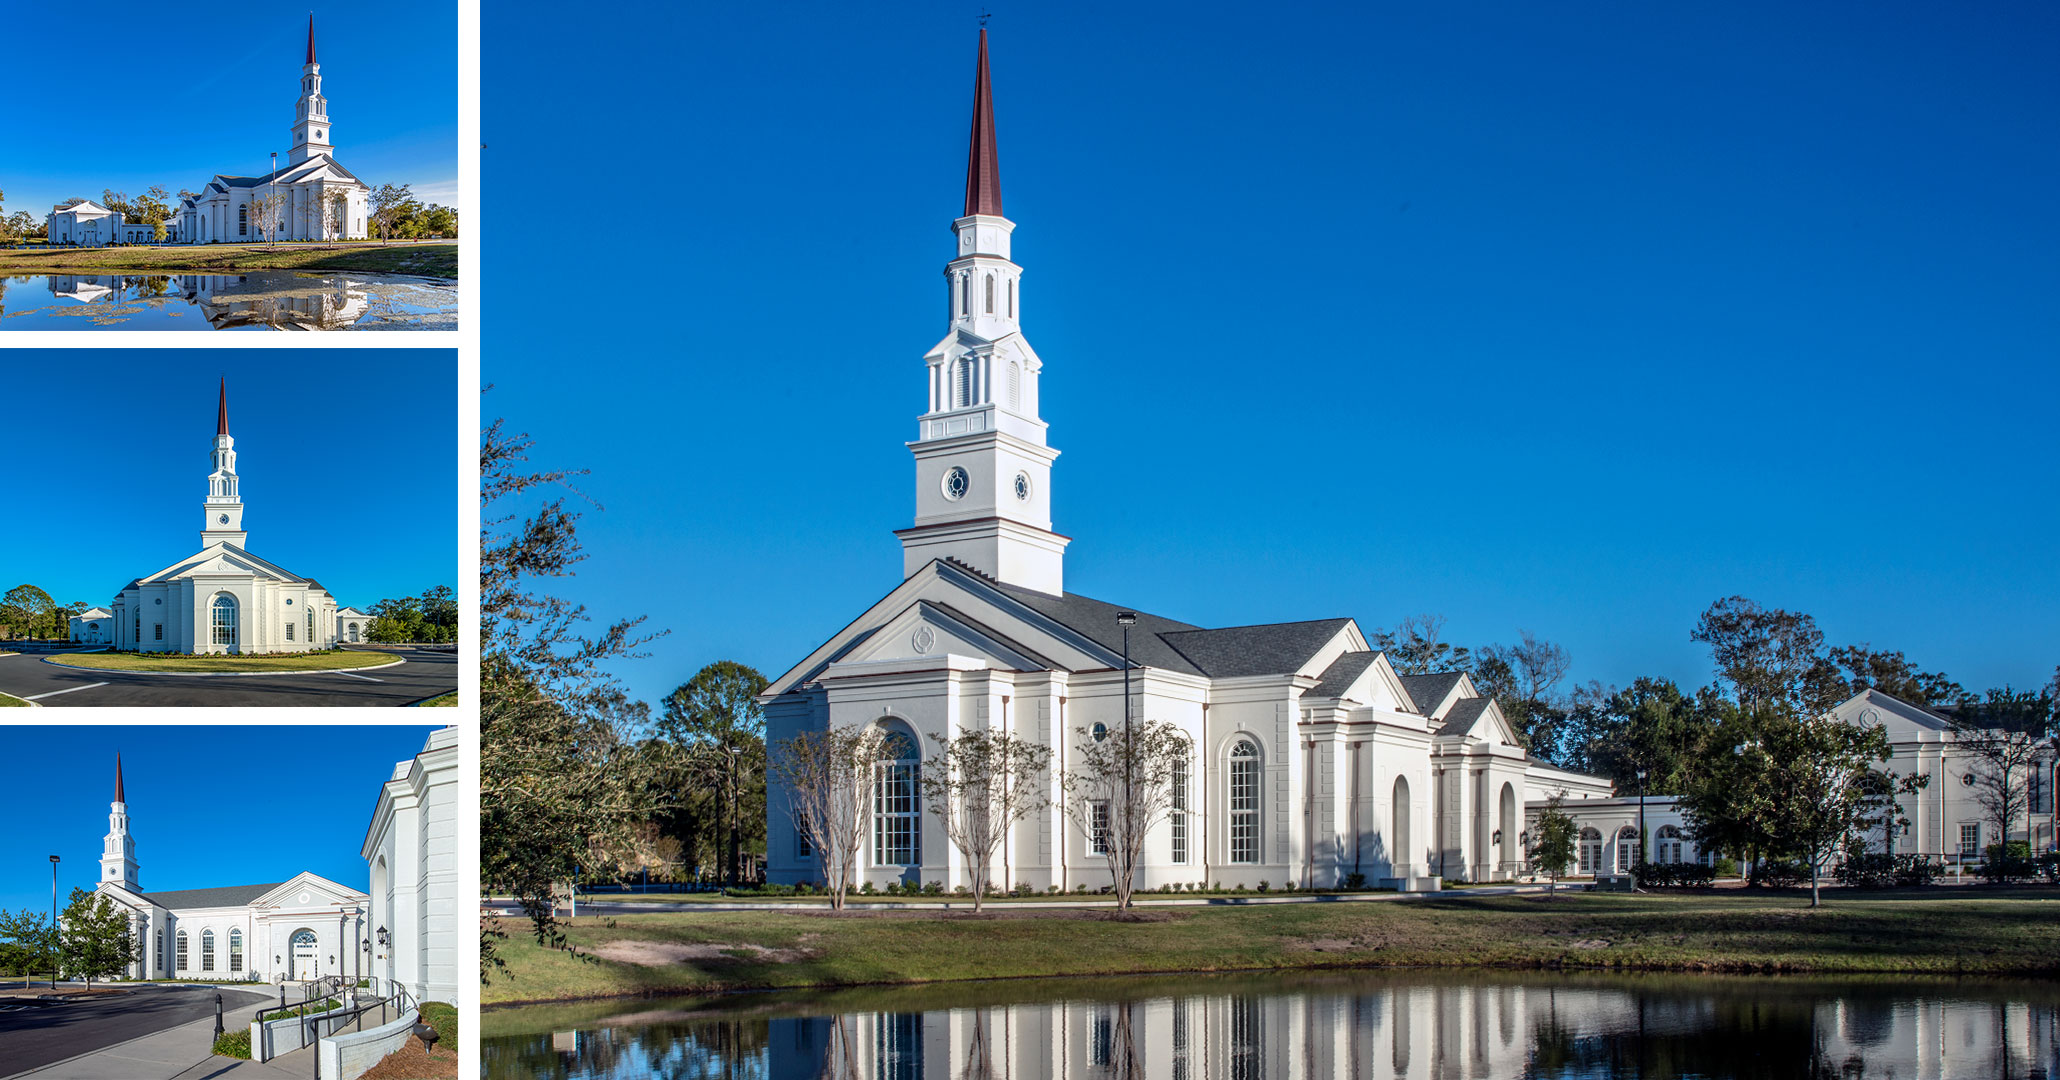 Boudreaux architects designed the First Presbyterian Church in Myrtle Beach, SC.